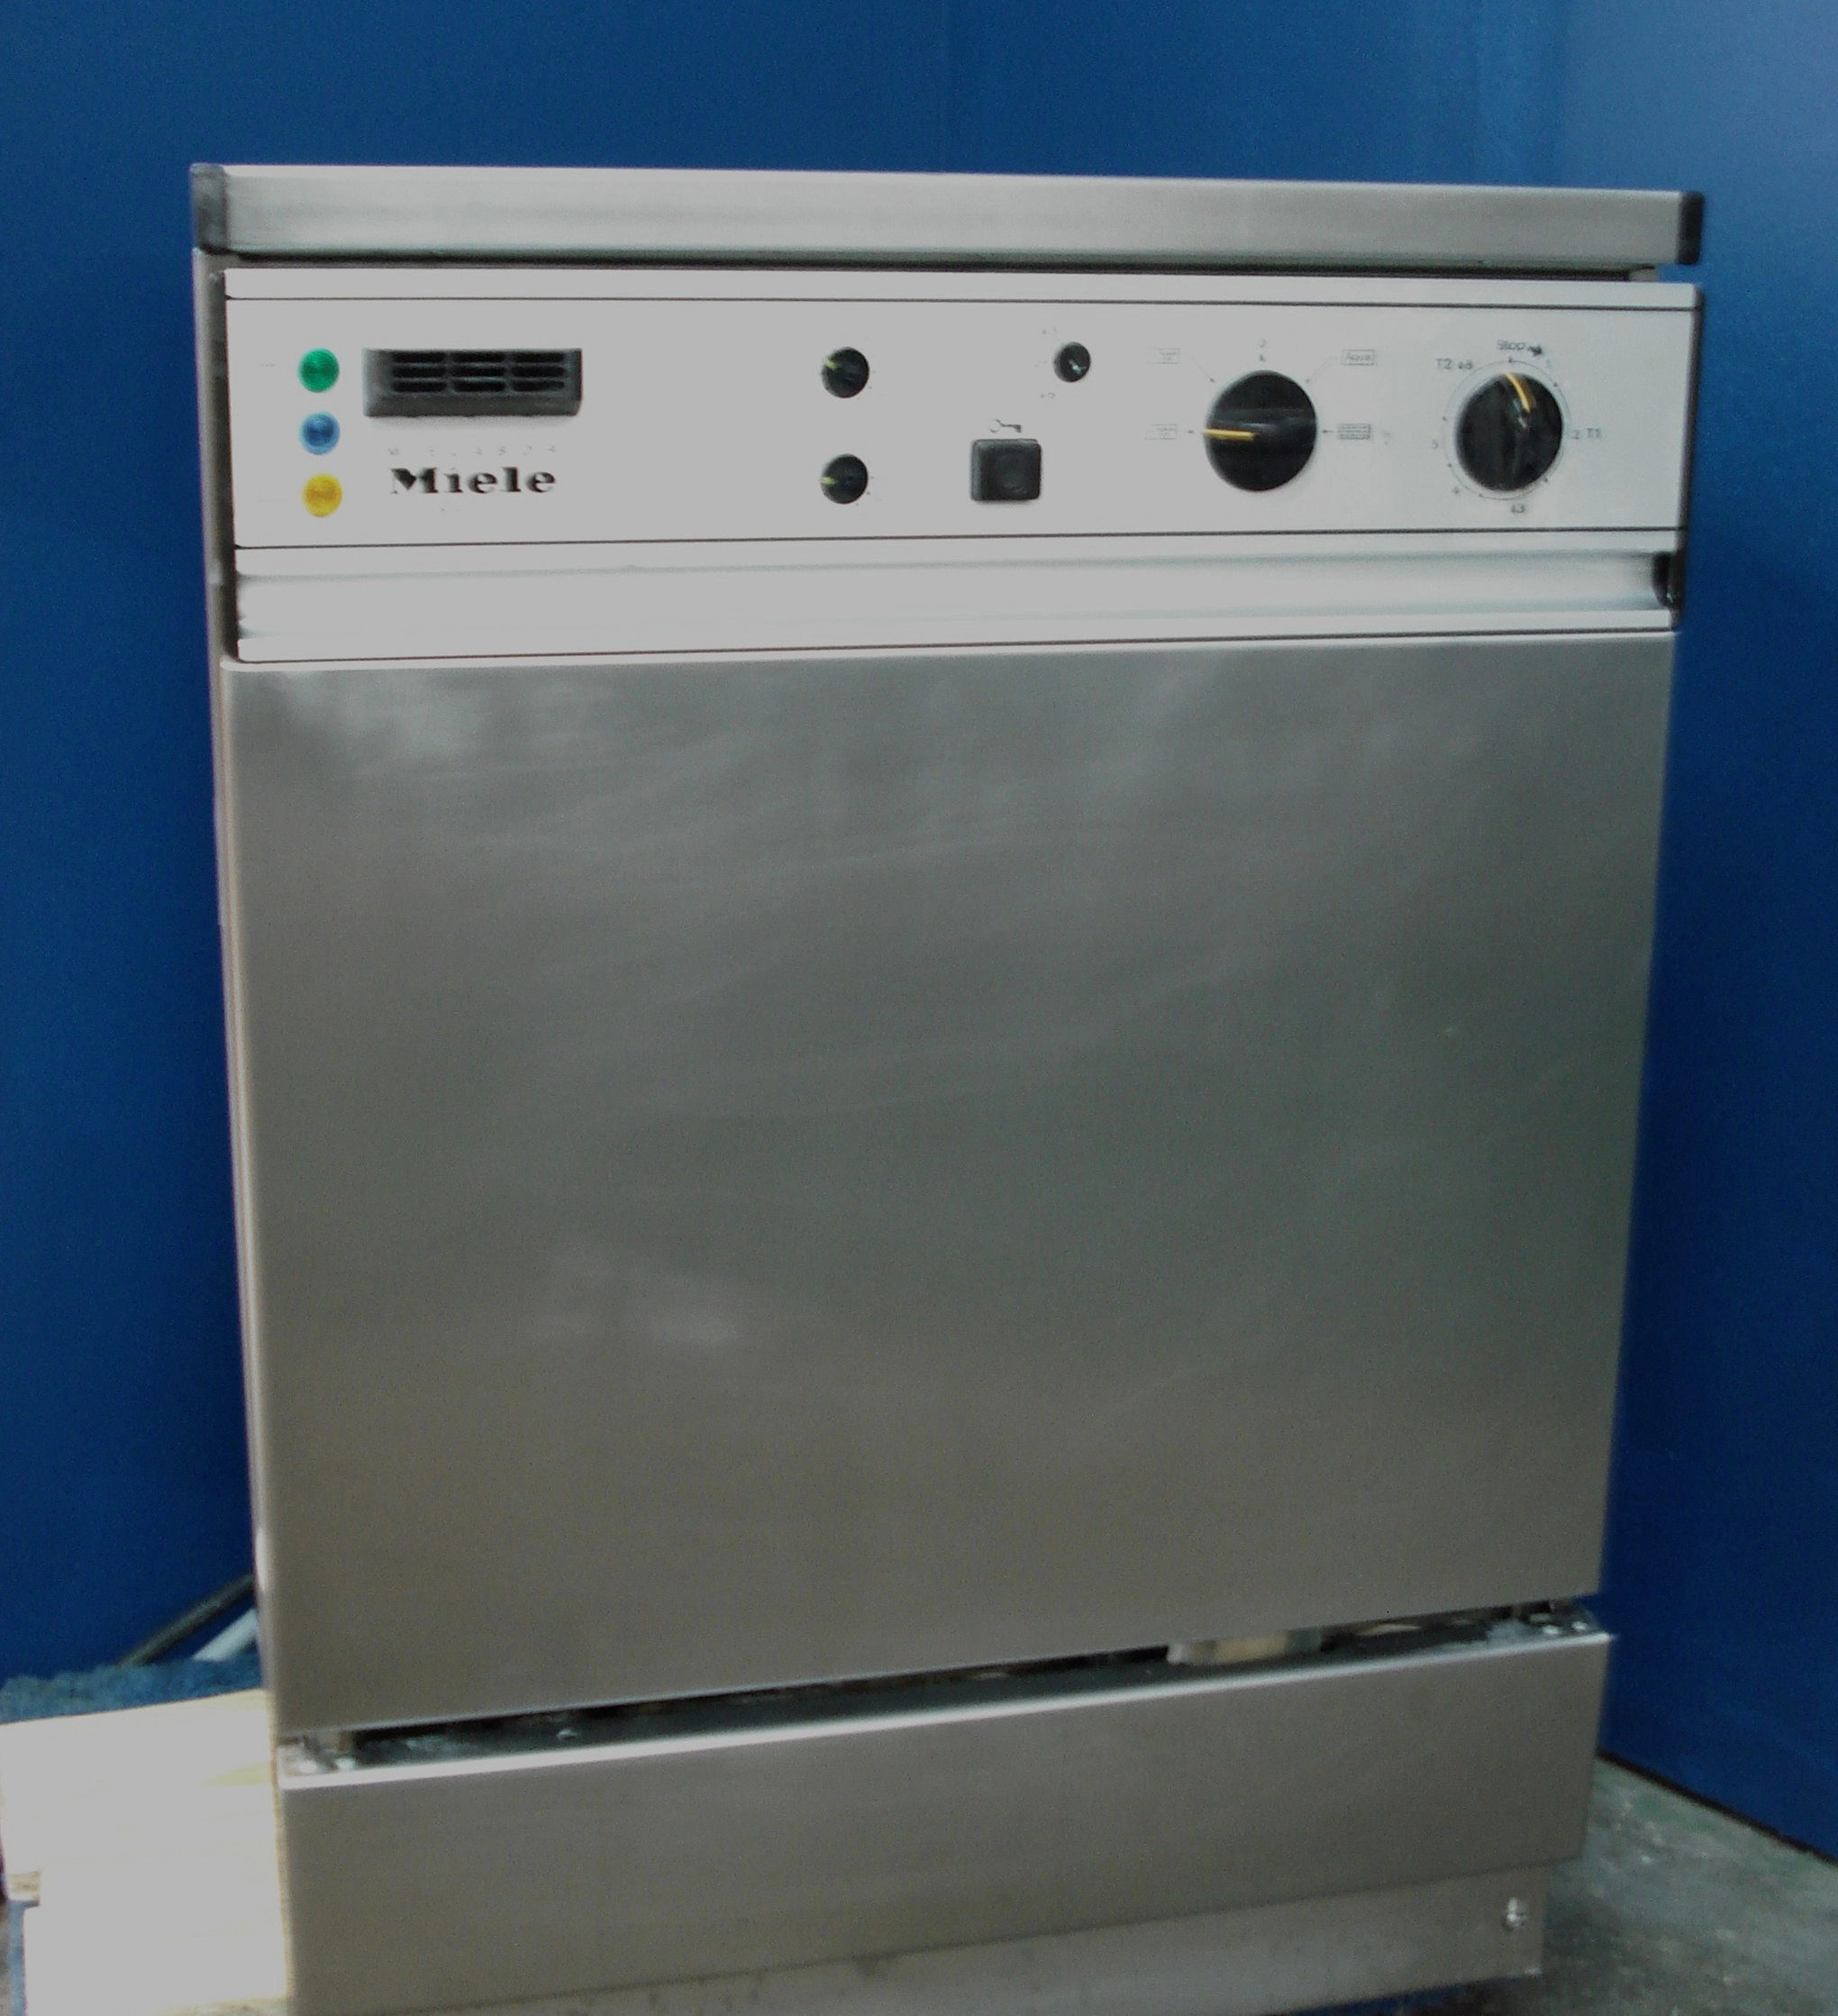 Miele G7733 Glassware Washer 1 of 2